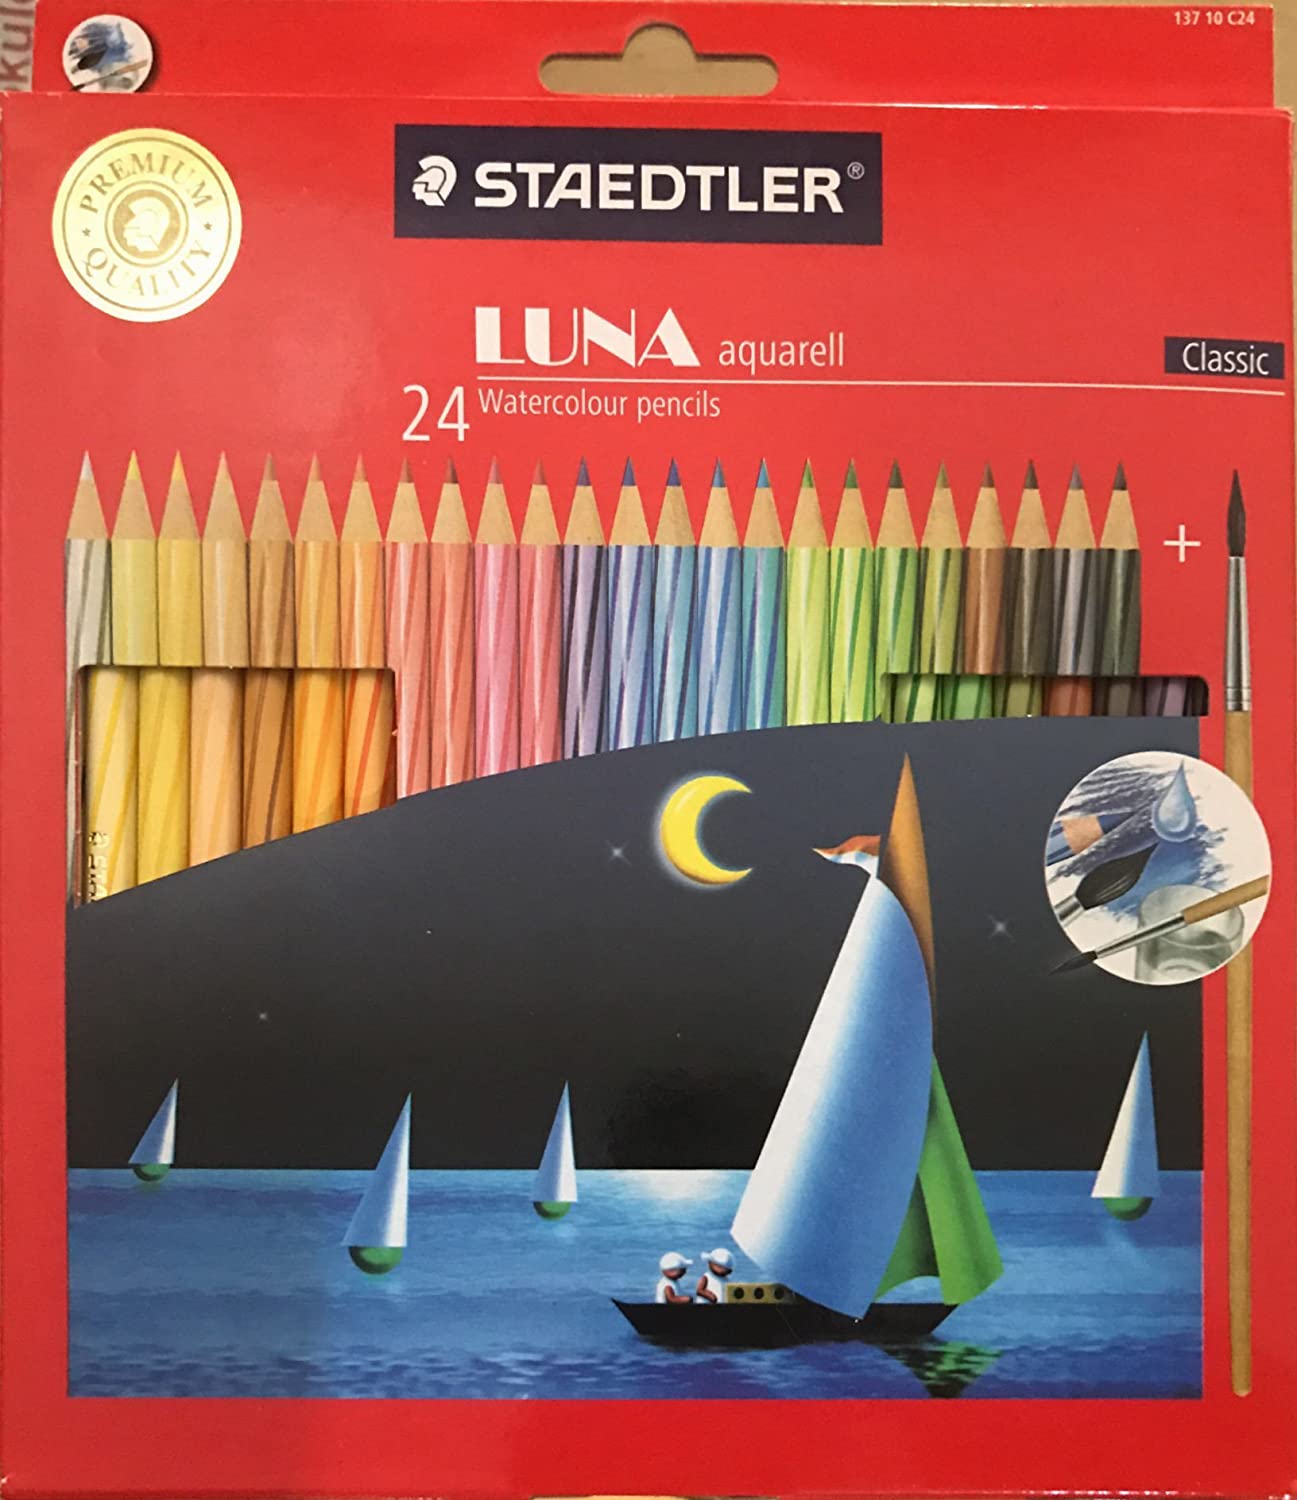 Staedtler Luna Classic 24 Color Water Color Pencil Set with Free Gift